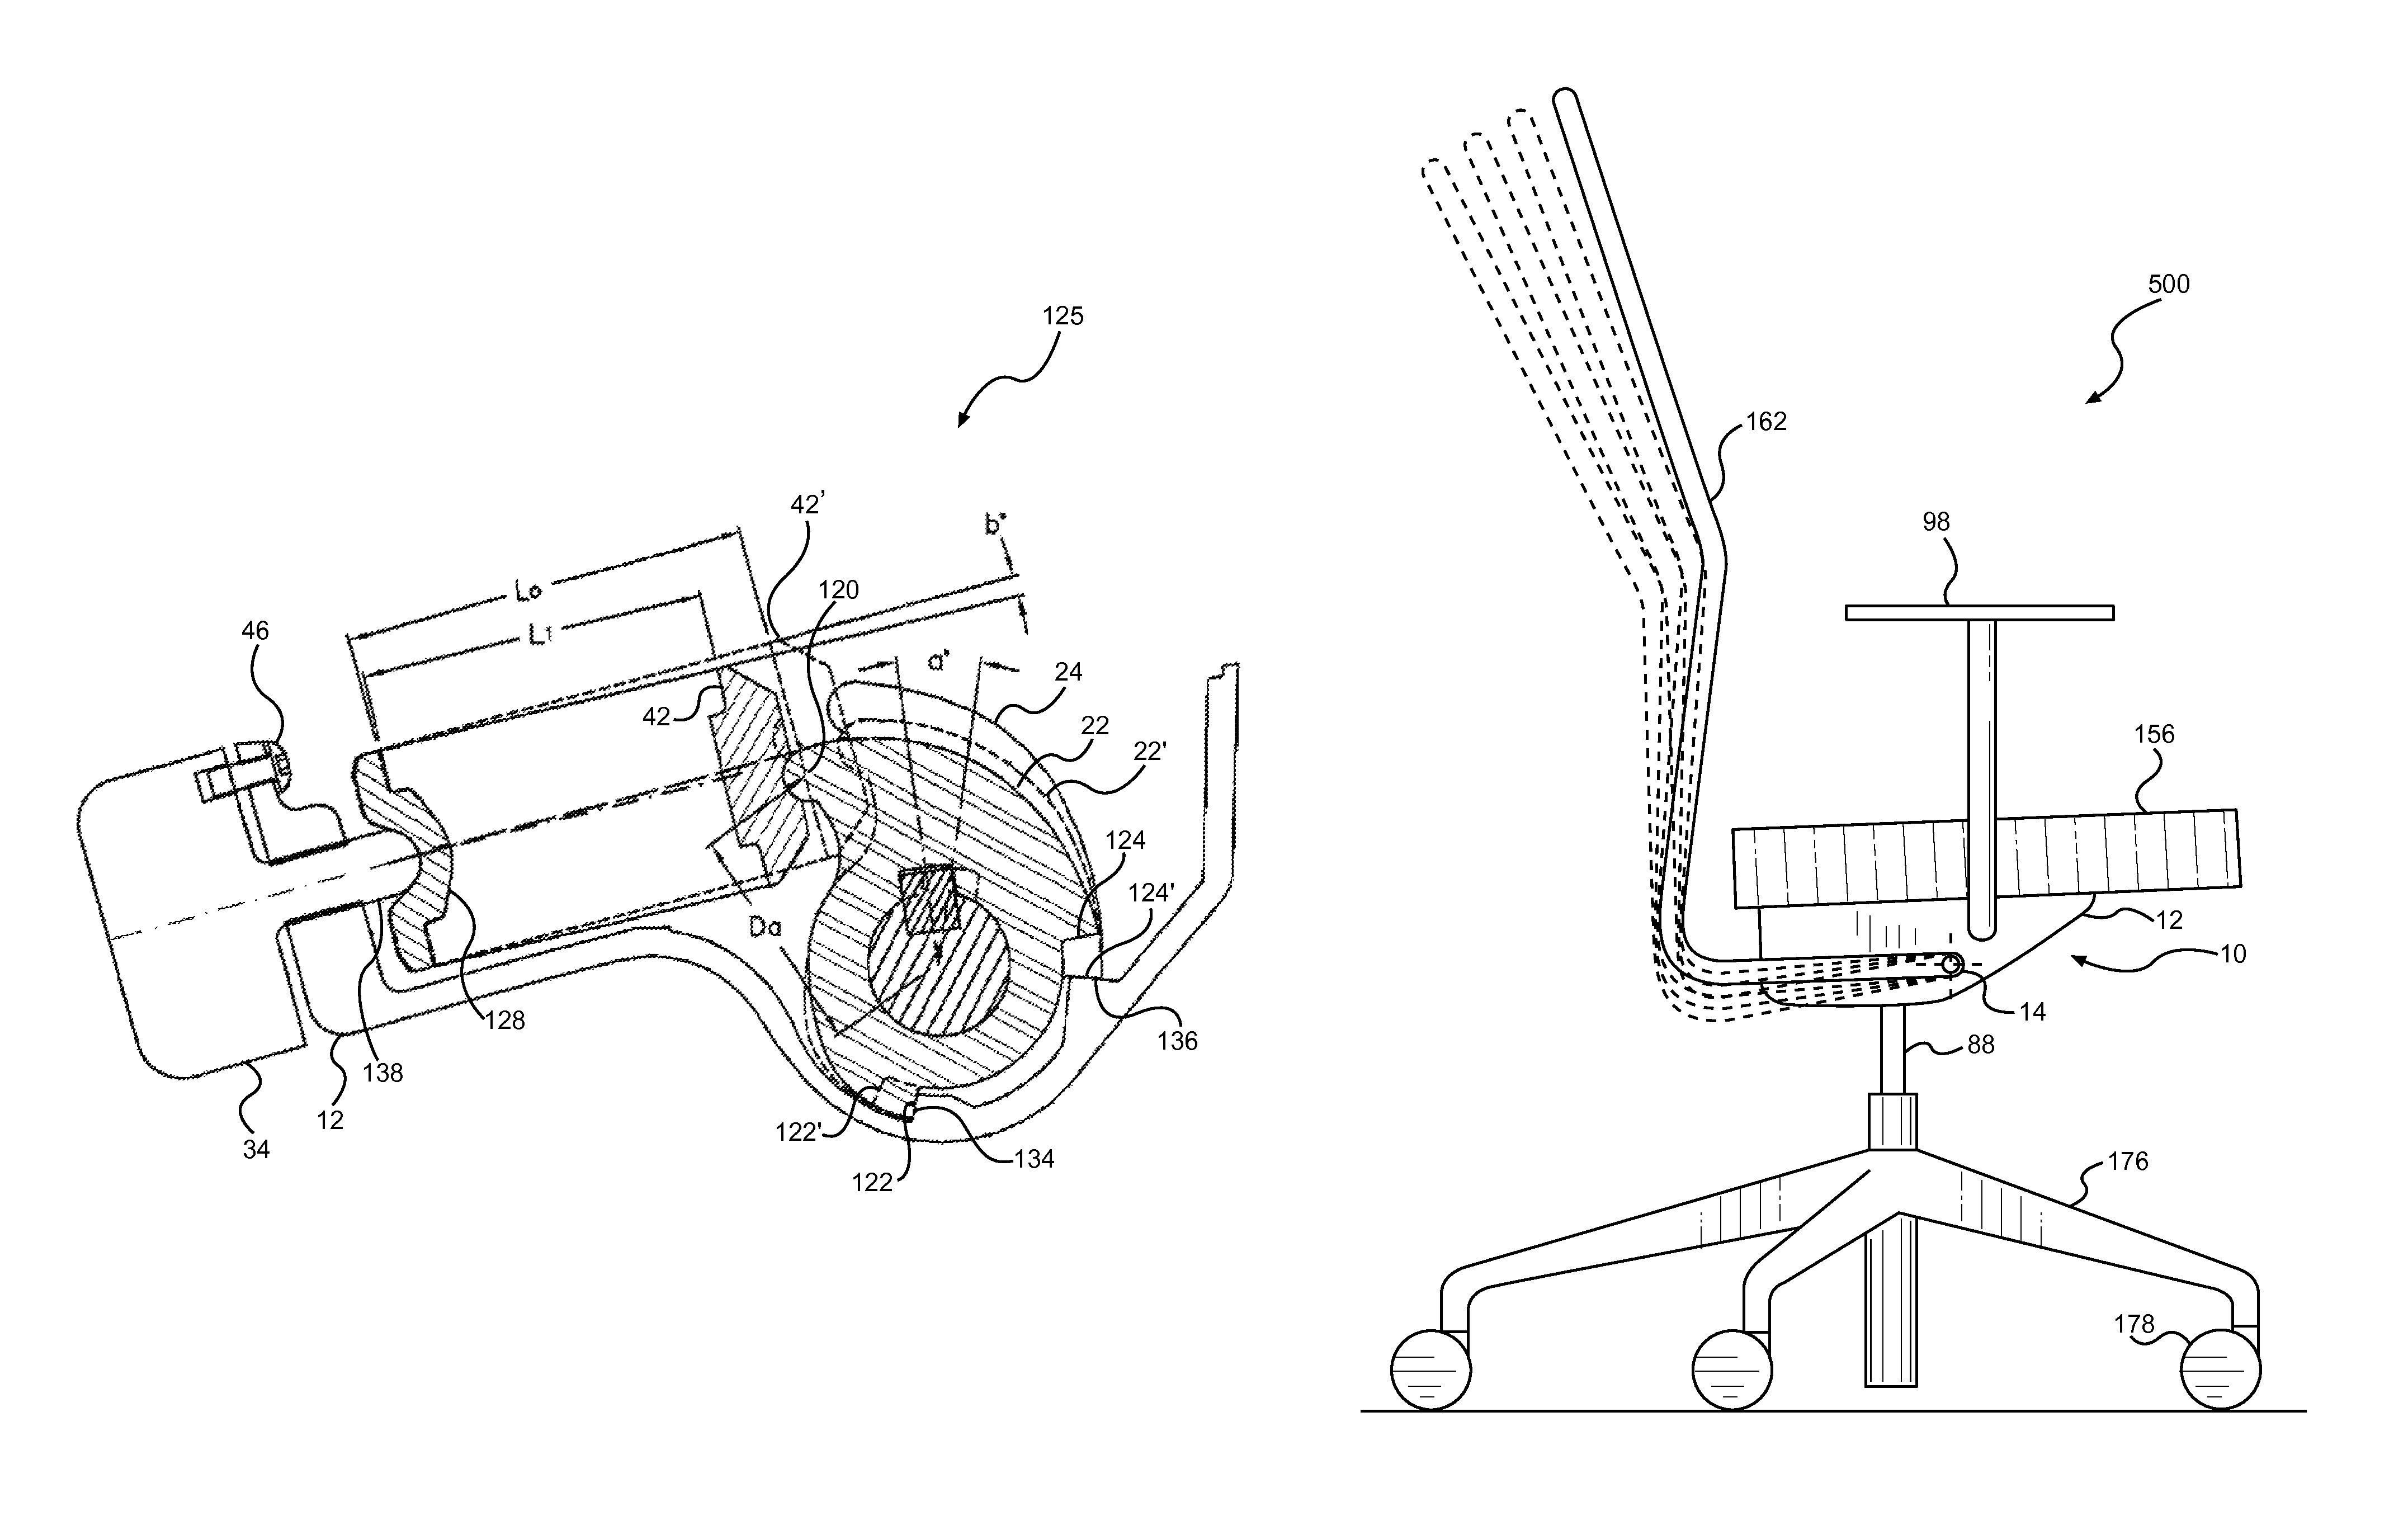 Mobile task chair and mobile task chair control mechanism with adjustment capabilities and visual setting indicators